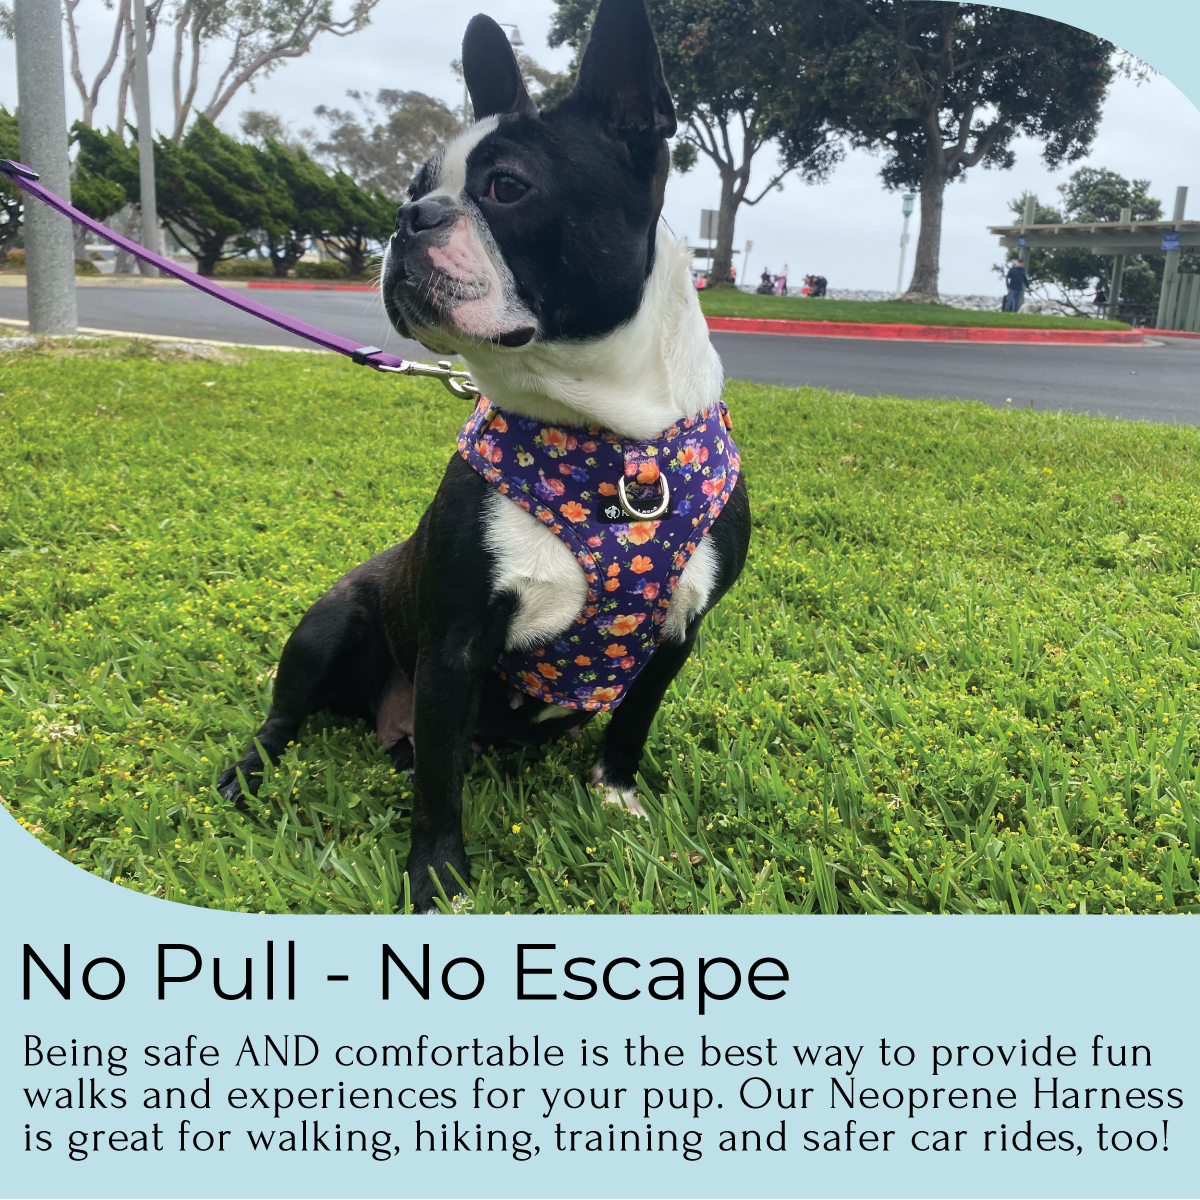 a photo of a black and white French bulldog harness  adjustable small dog harness in purple. The dog is sitting on grass and below it is text indicating no pull no escape features of the harness